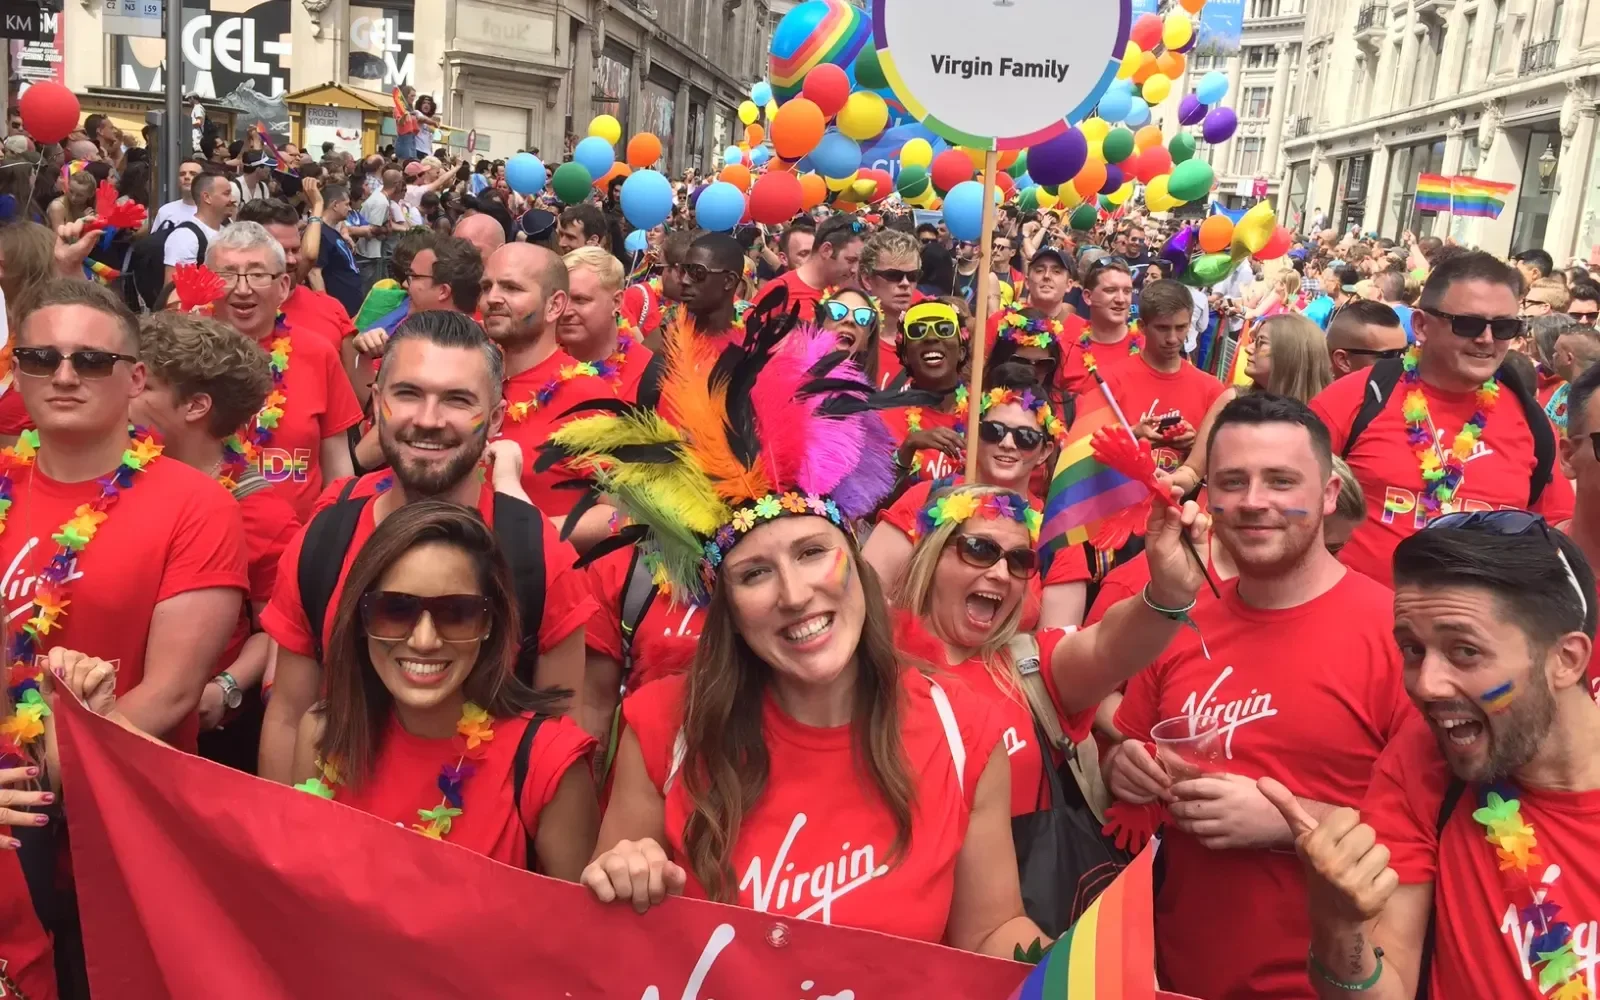 Virgin staff members in the London Pride parade, wearing red tshirts with the Virgin logo on them, surrounded by rainbow flags and balloons